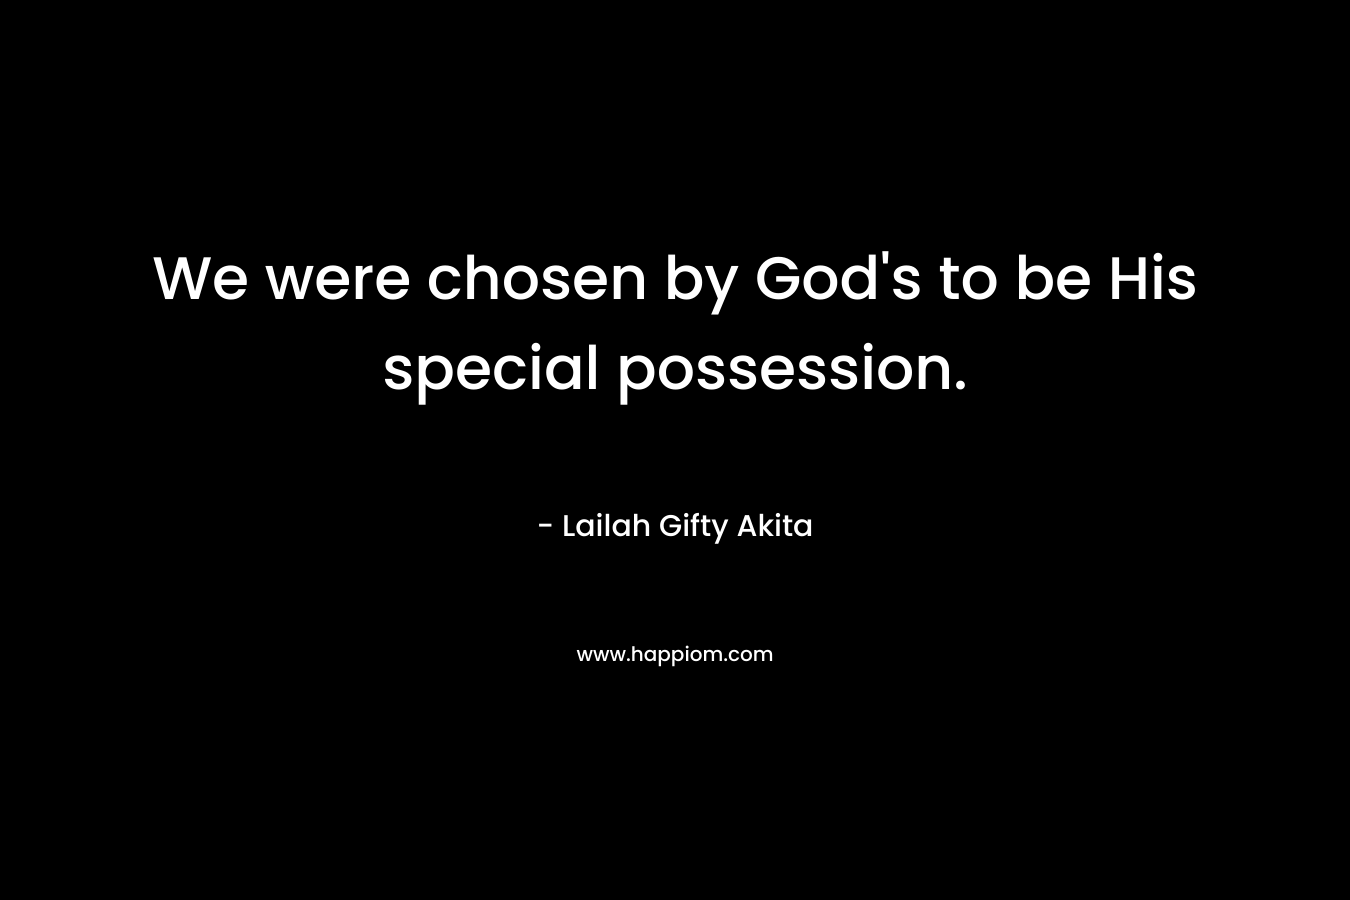 We were chosen by God's to be His special possession.